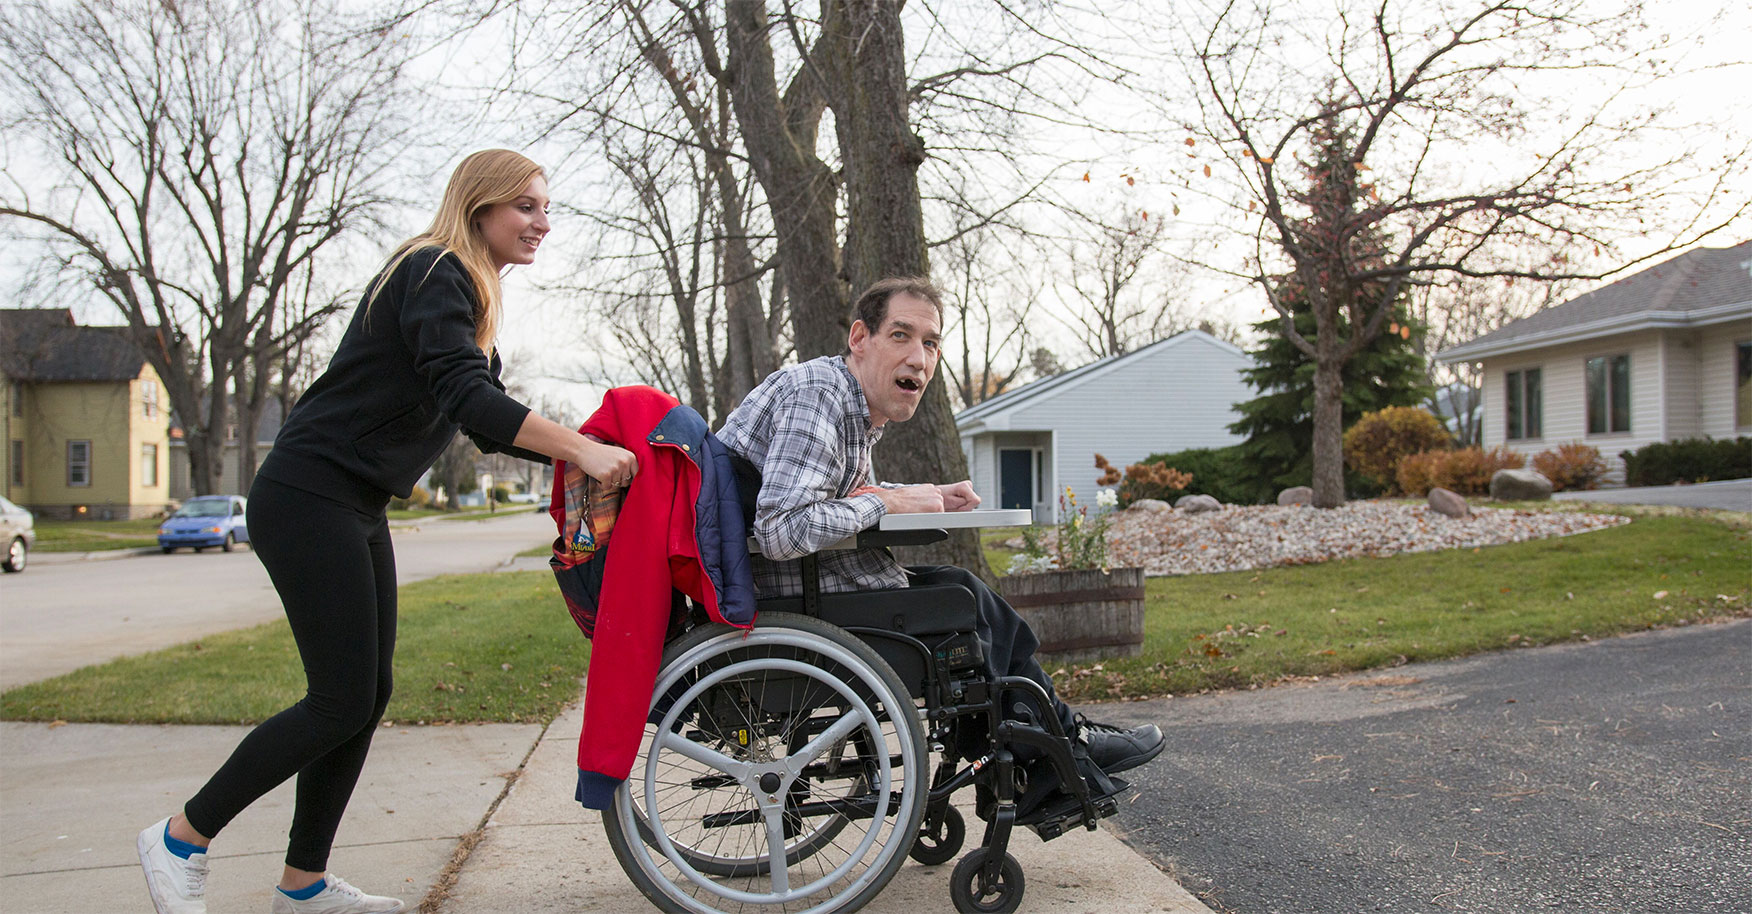 A caregiver pushing an adult with disabilities in a wheelchair.